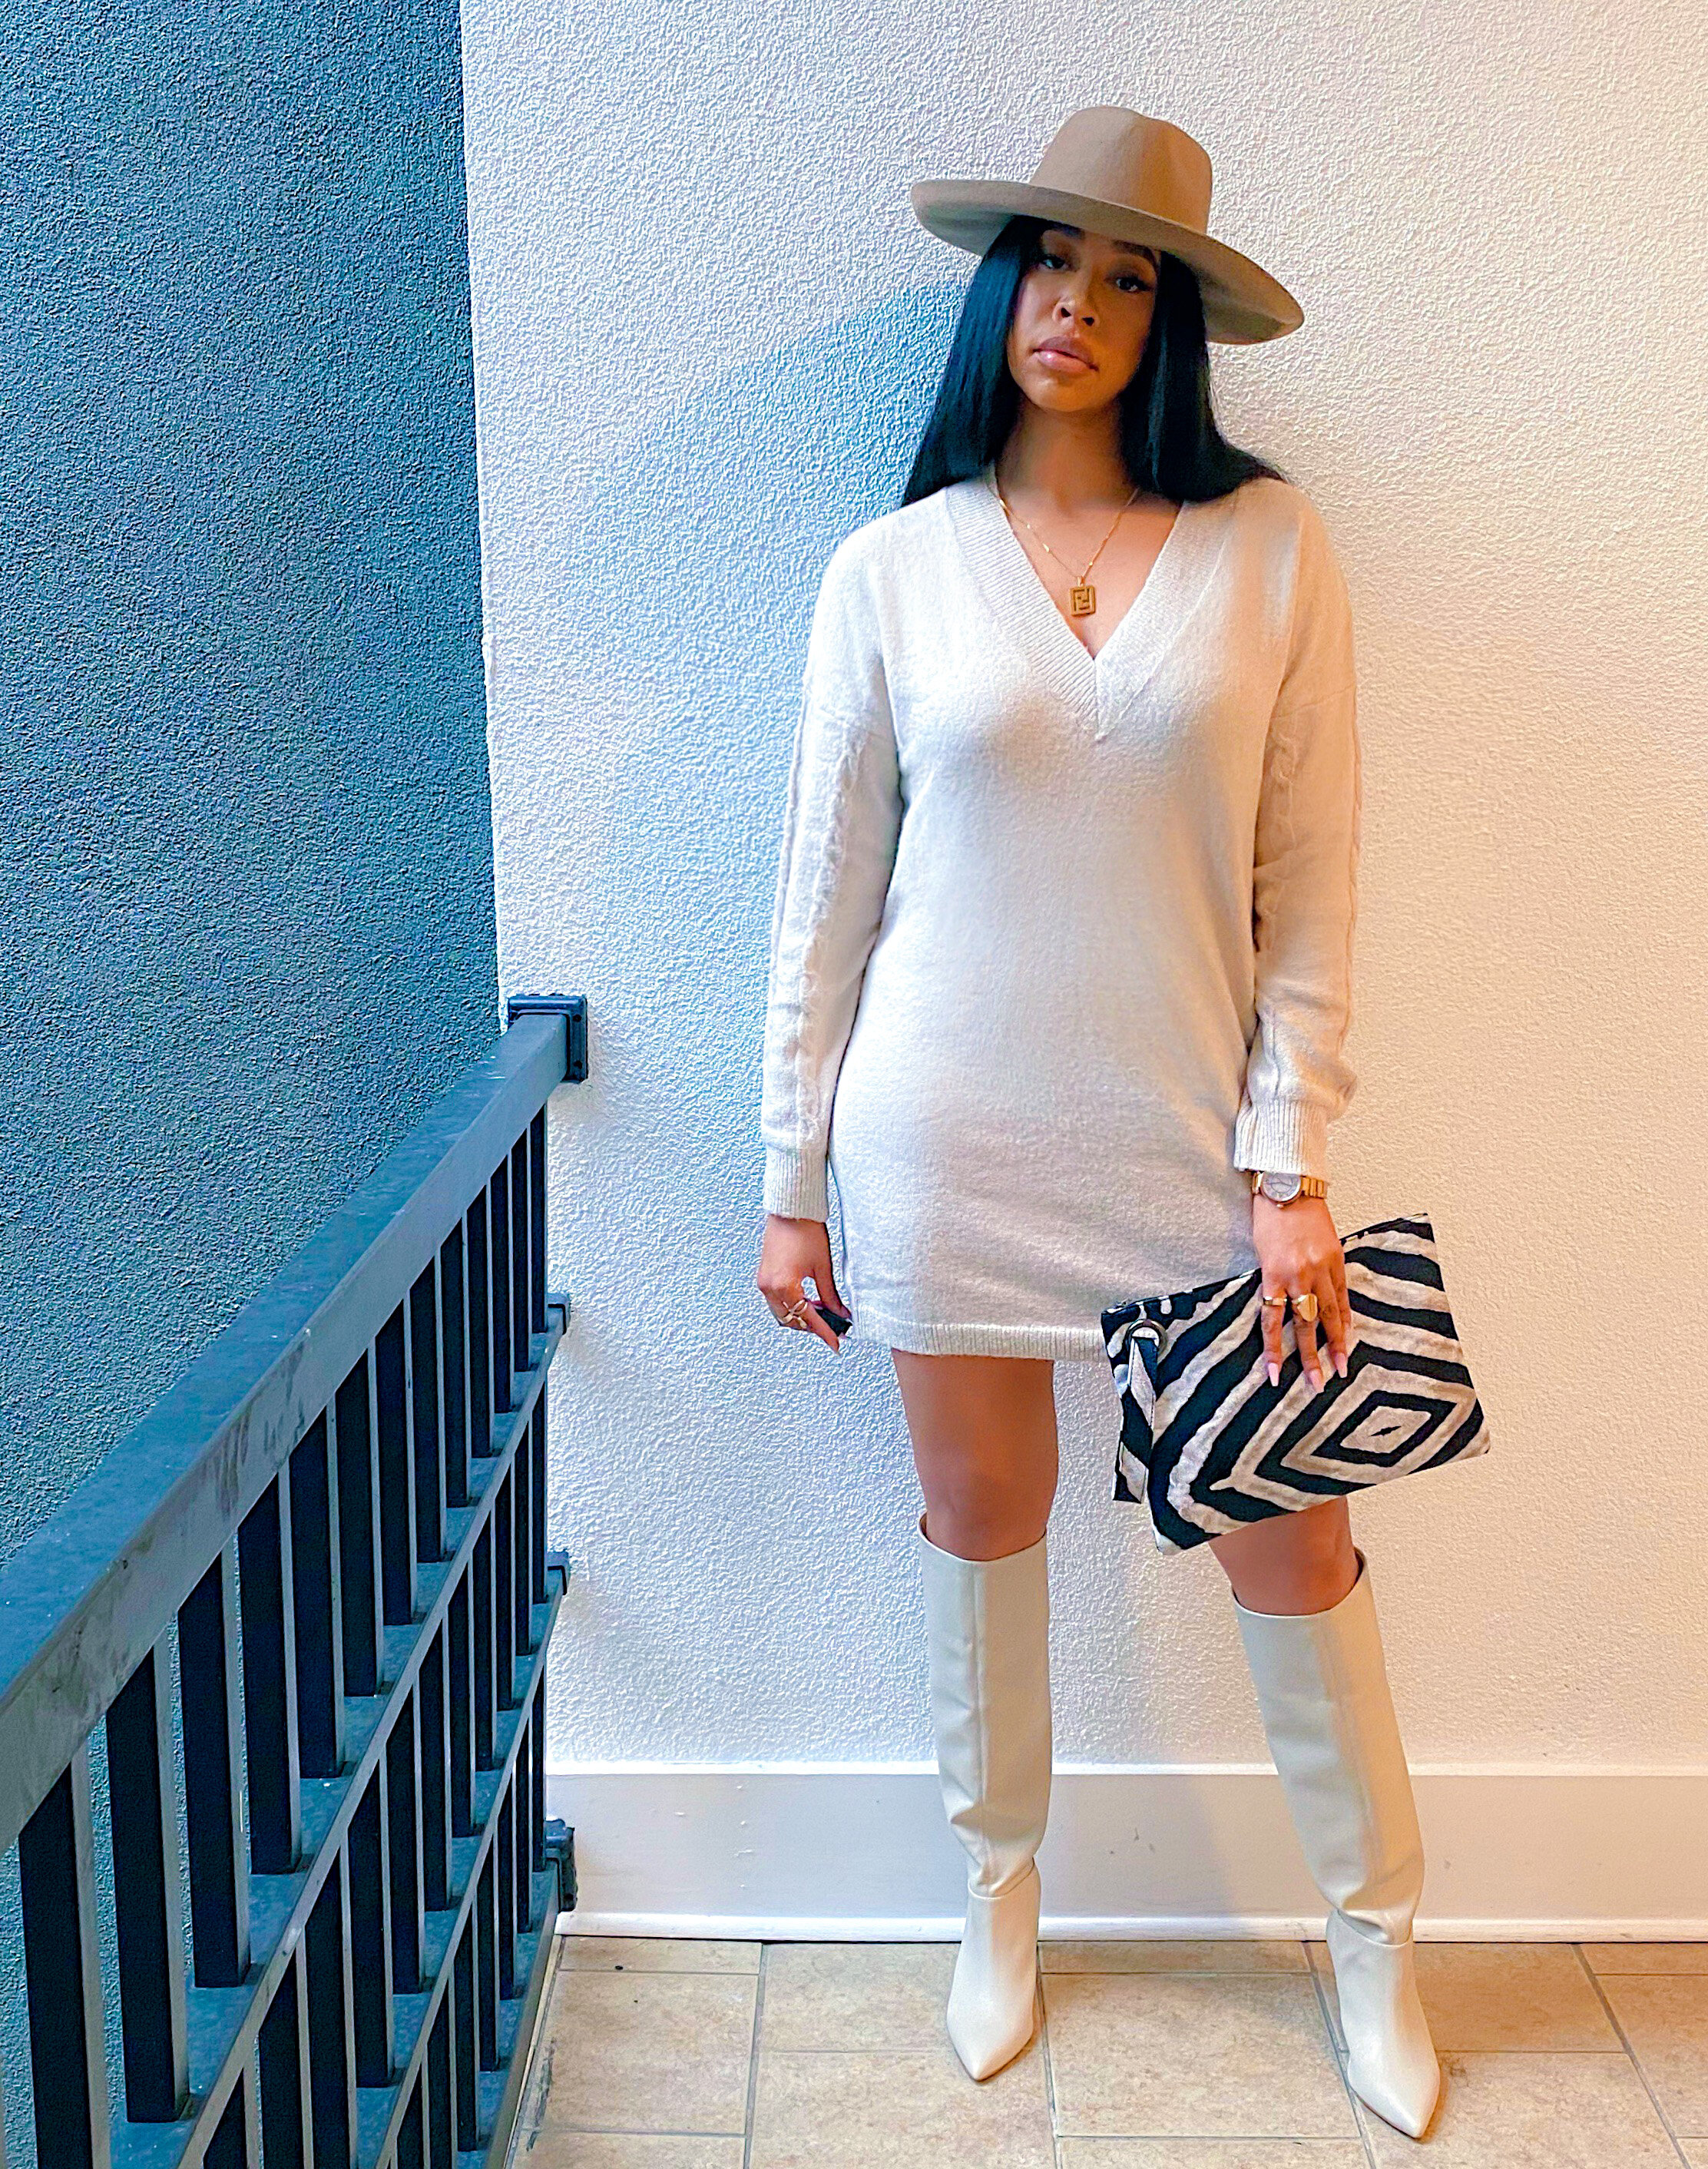   Hat    https://rstyle.me/cz-n/erpbfqcyh67    Sweater dress    https://tidd.ly/33yHGFR    Plus option    https://tidd.ly/2Vk8TYq    Boots   (linked 2 sites in case one sells out)    https://rstyle.me/cz-n/etsa4ucyh67    https://rstyle.me/cz-n/etsa2n